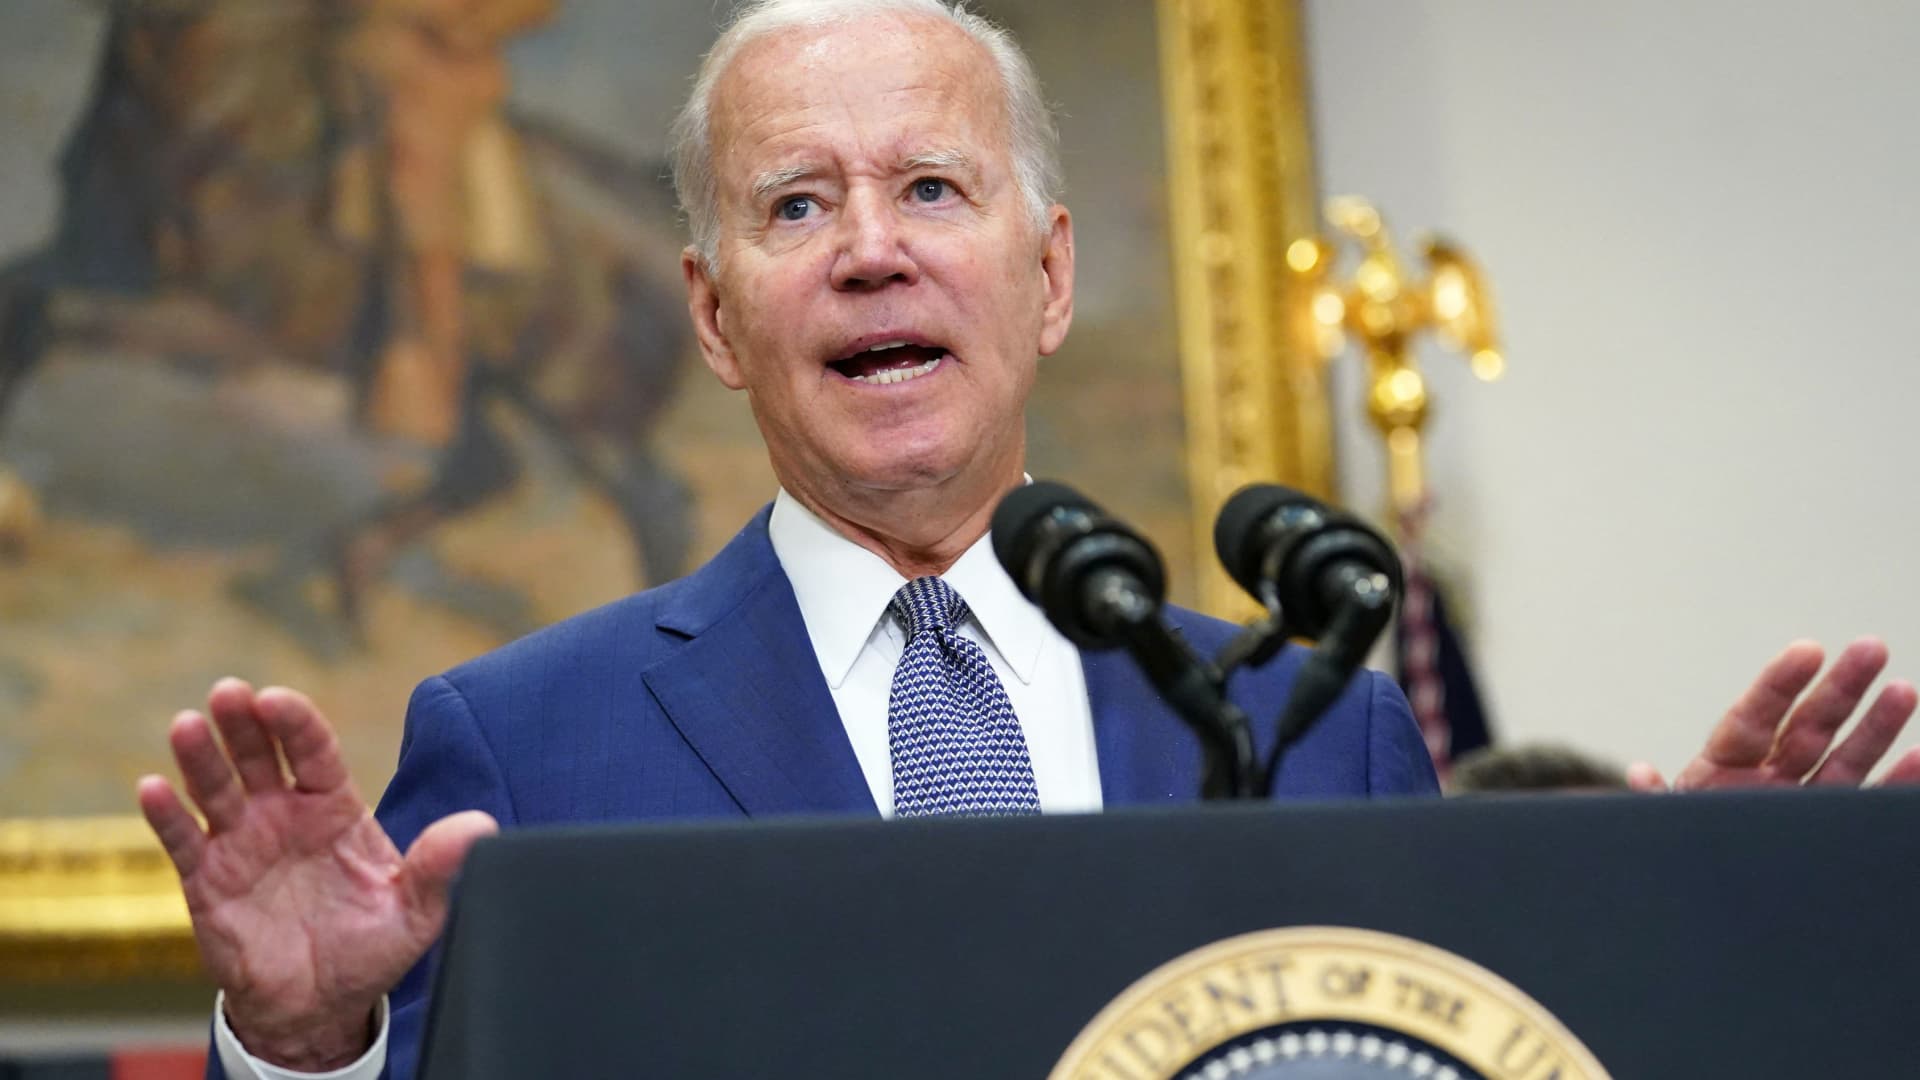 Biden says Supreme Court is 'out of control,' orders HHS to protect abortion access